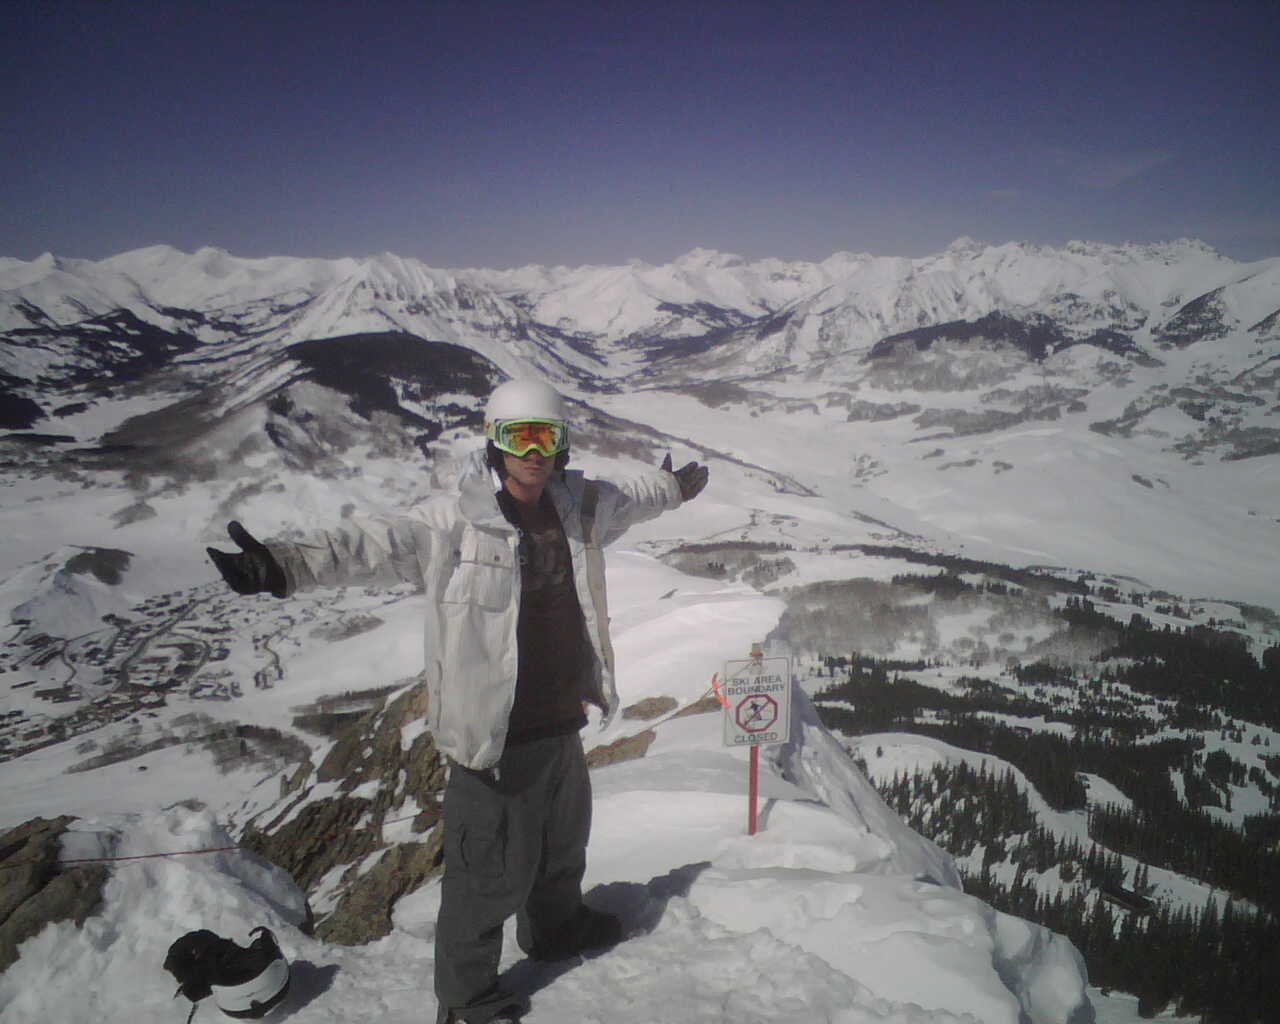 Crested butte